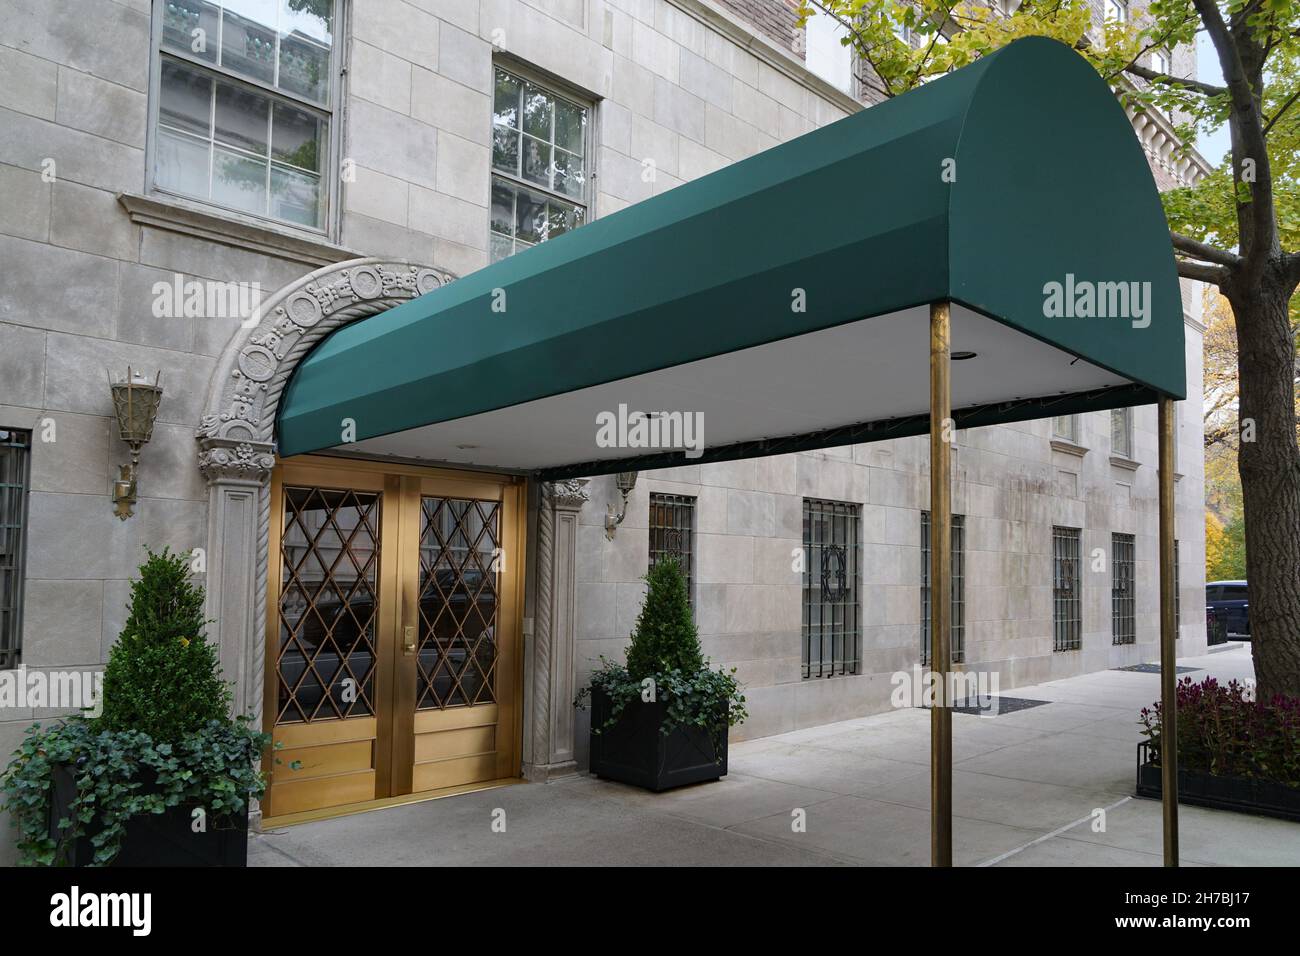 Manhattan elegant upscale apartment building and awning leading from front door to street Stock Photo